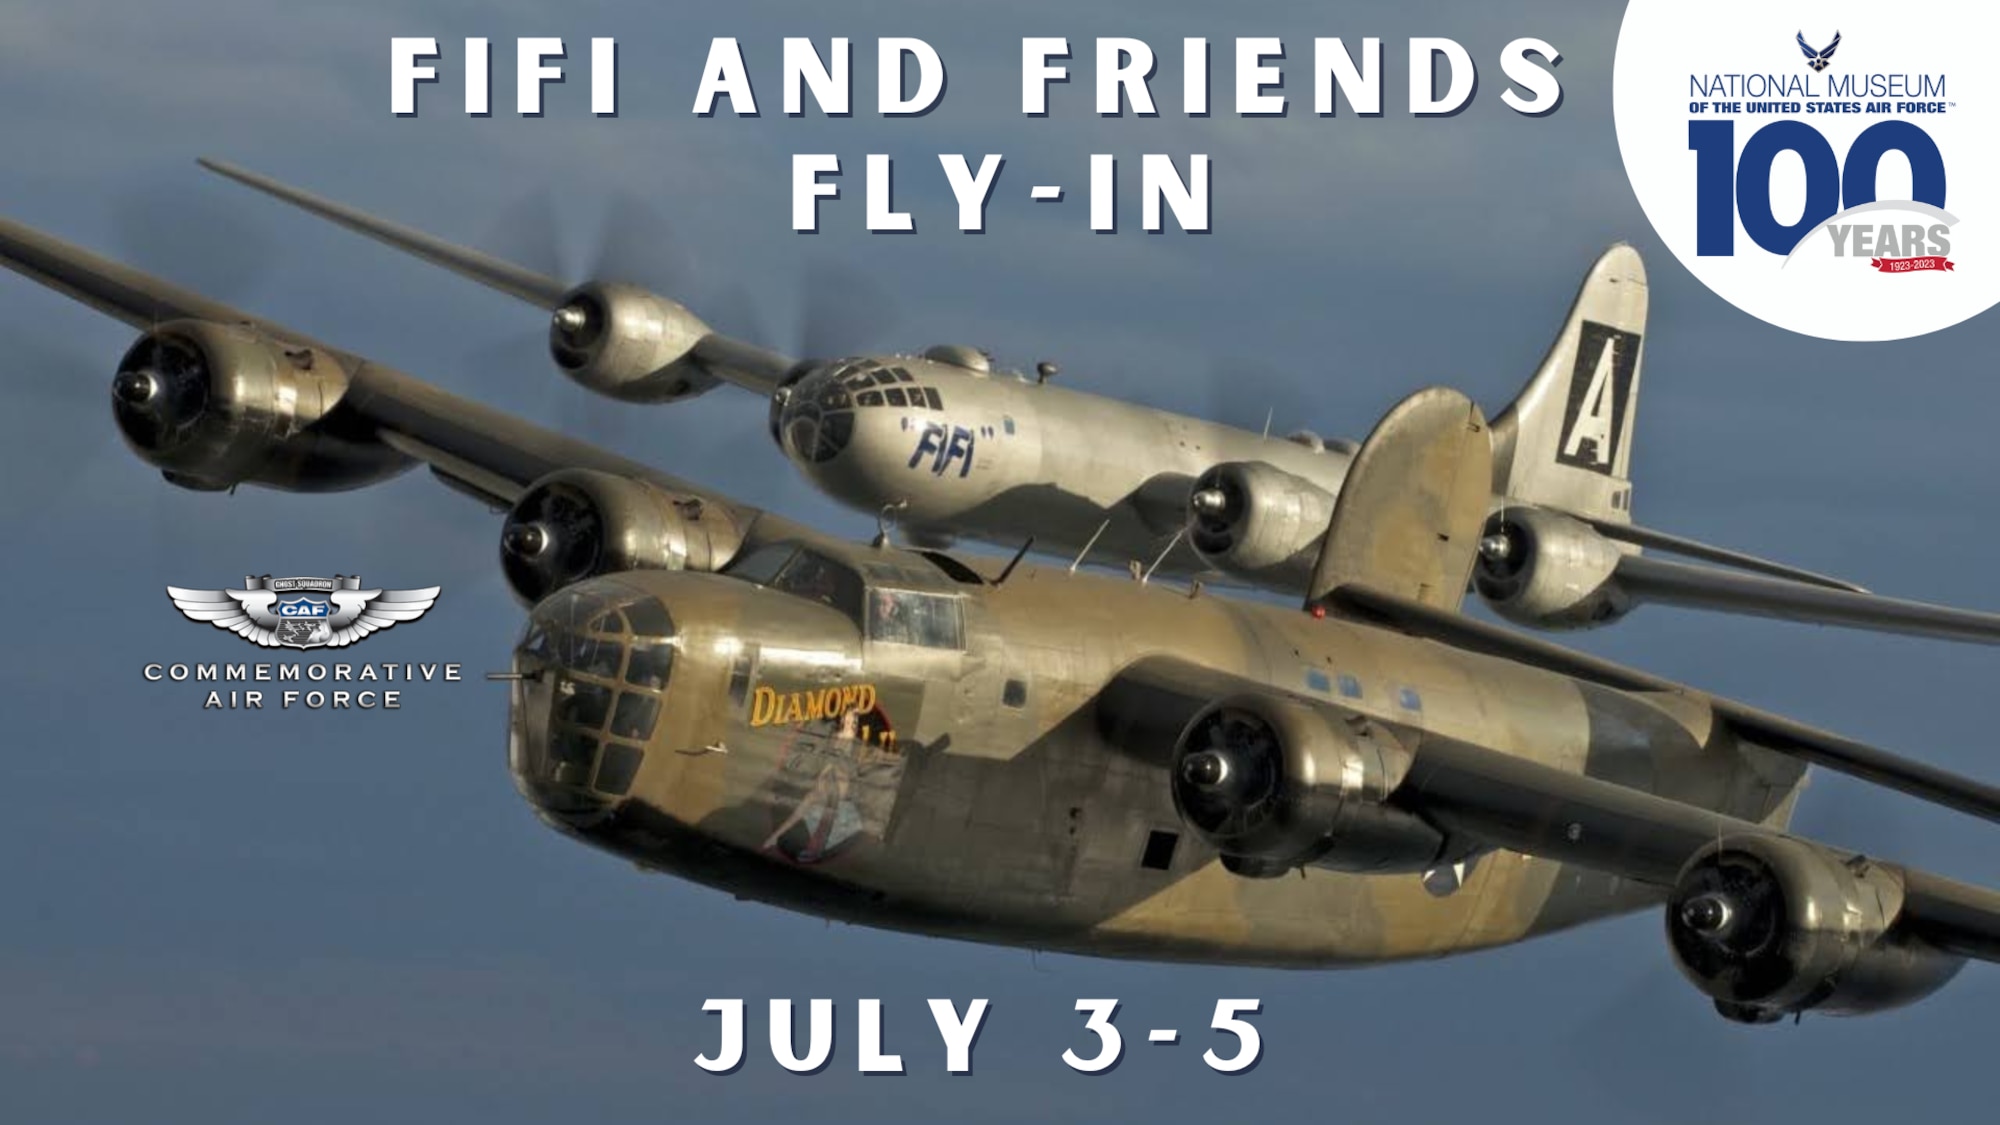 The public is invited to the National Museum of the U.S. Air Force to see three different WWII-era aircraft flown by the Commemorative Air Force during their Air Power History Tour. Aircraft will arrive July 3 and will feature the B-29 Superfortress FiFi, B-24 Liberator Diamond Lil, and a T-6 Texan, the legendary trainer of WWII.